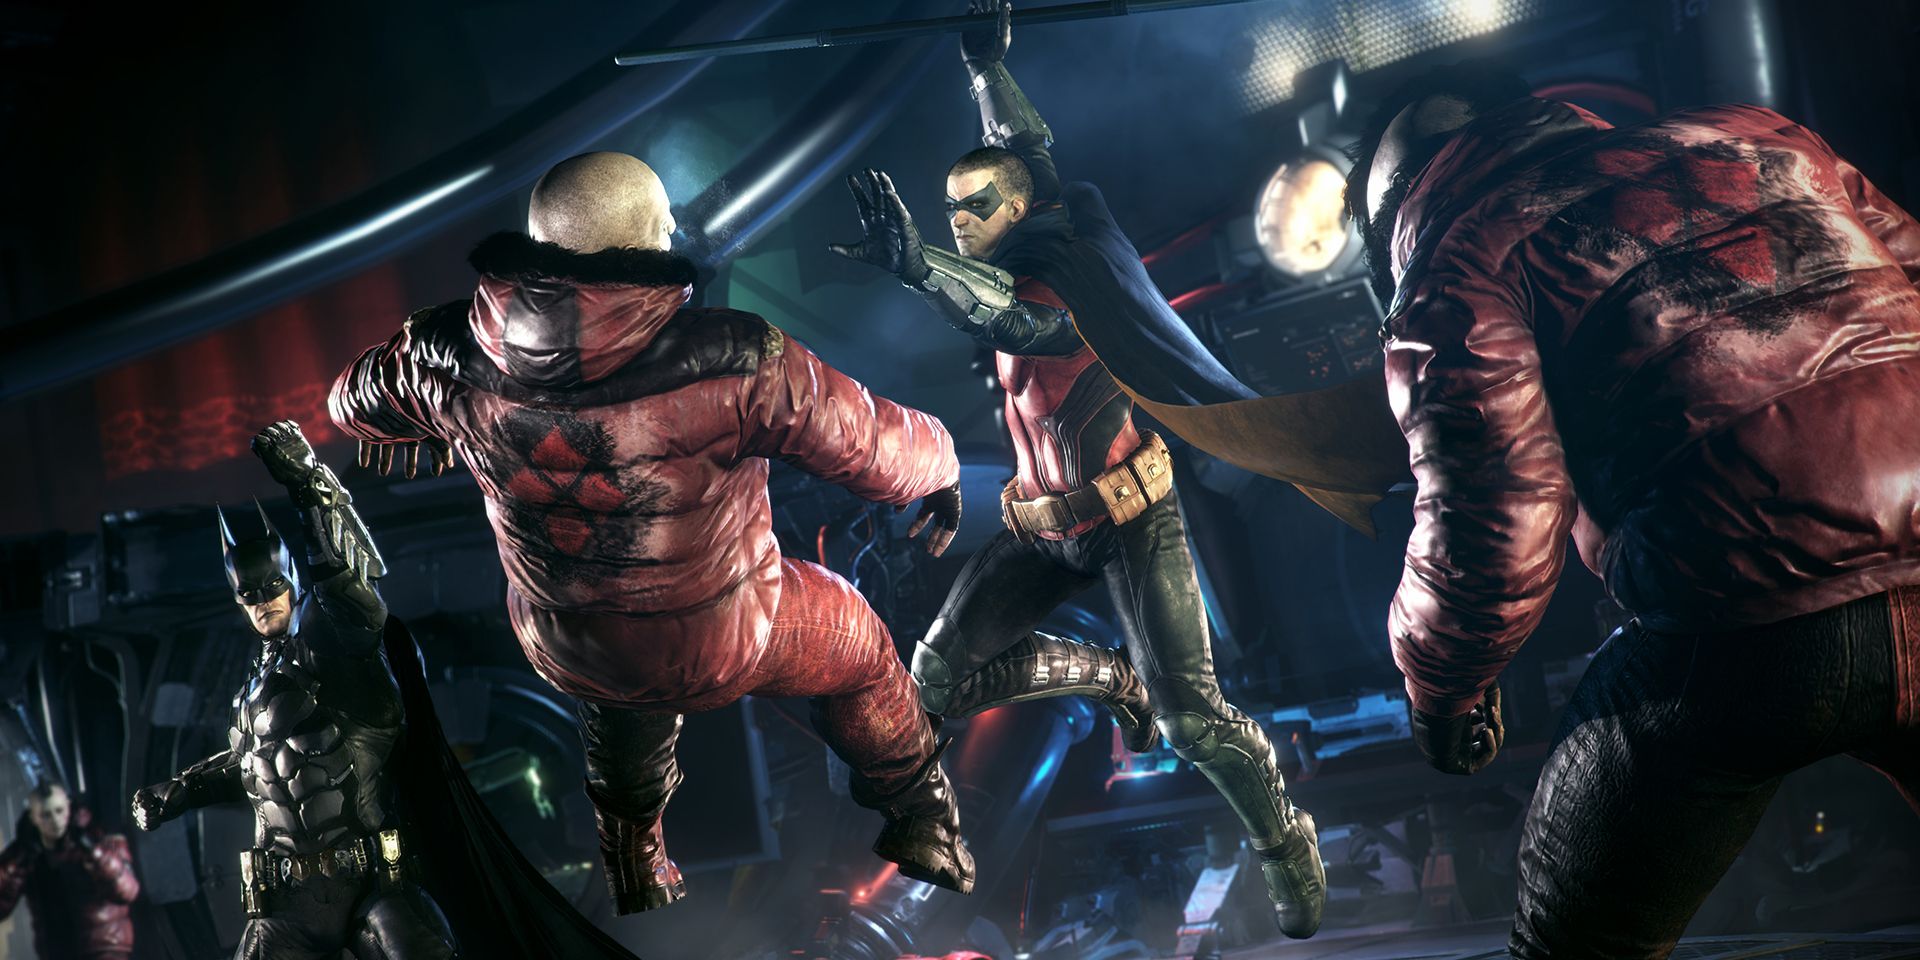 The most annoying thugs in Batman: Arkham interrupt the satisfying flow of the games' combat.